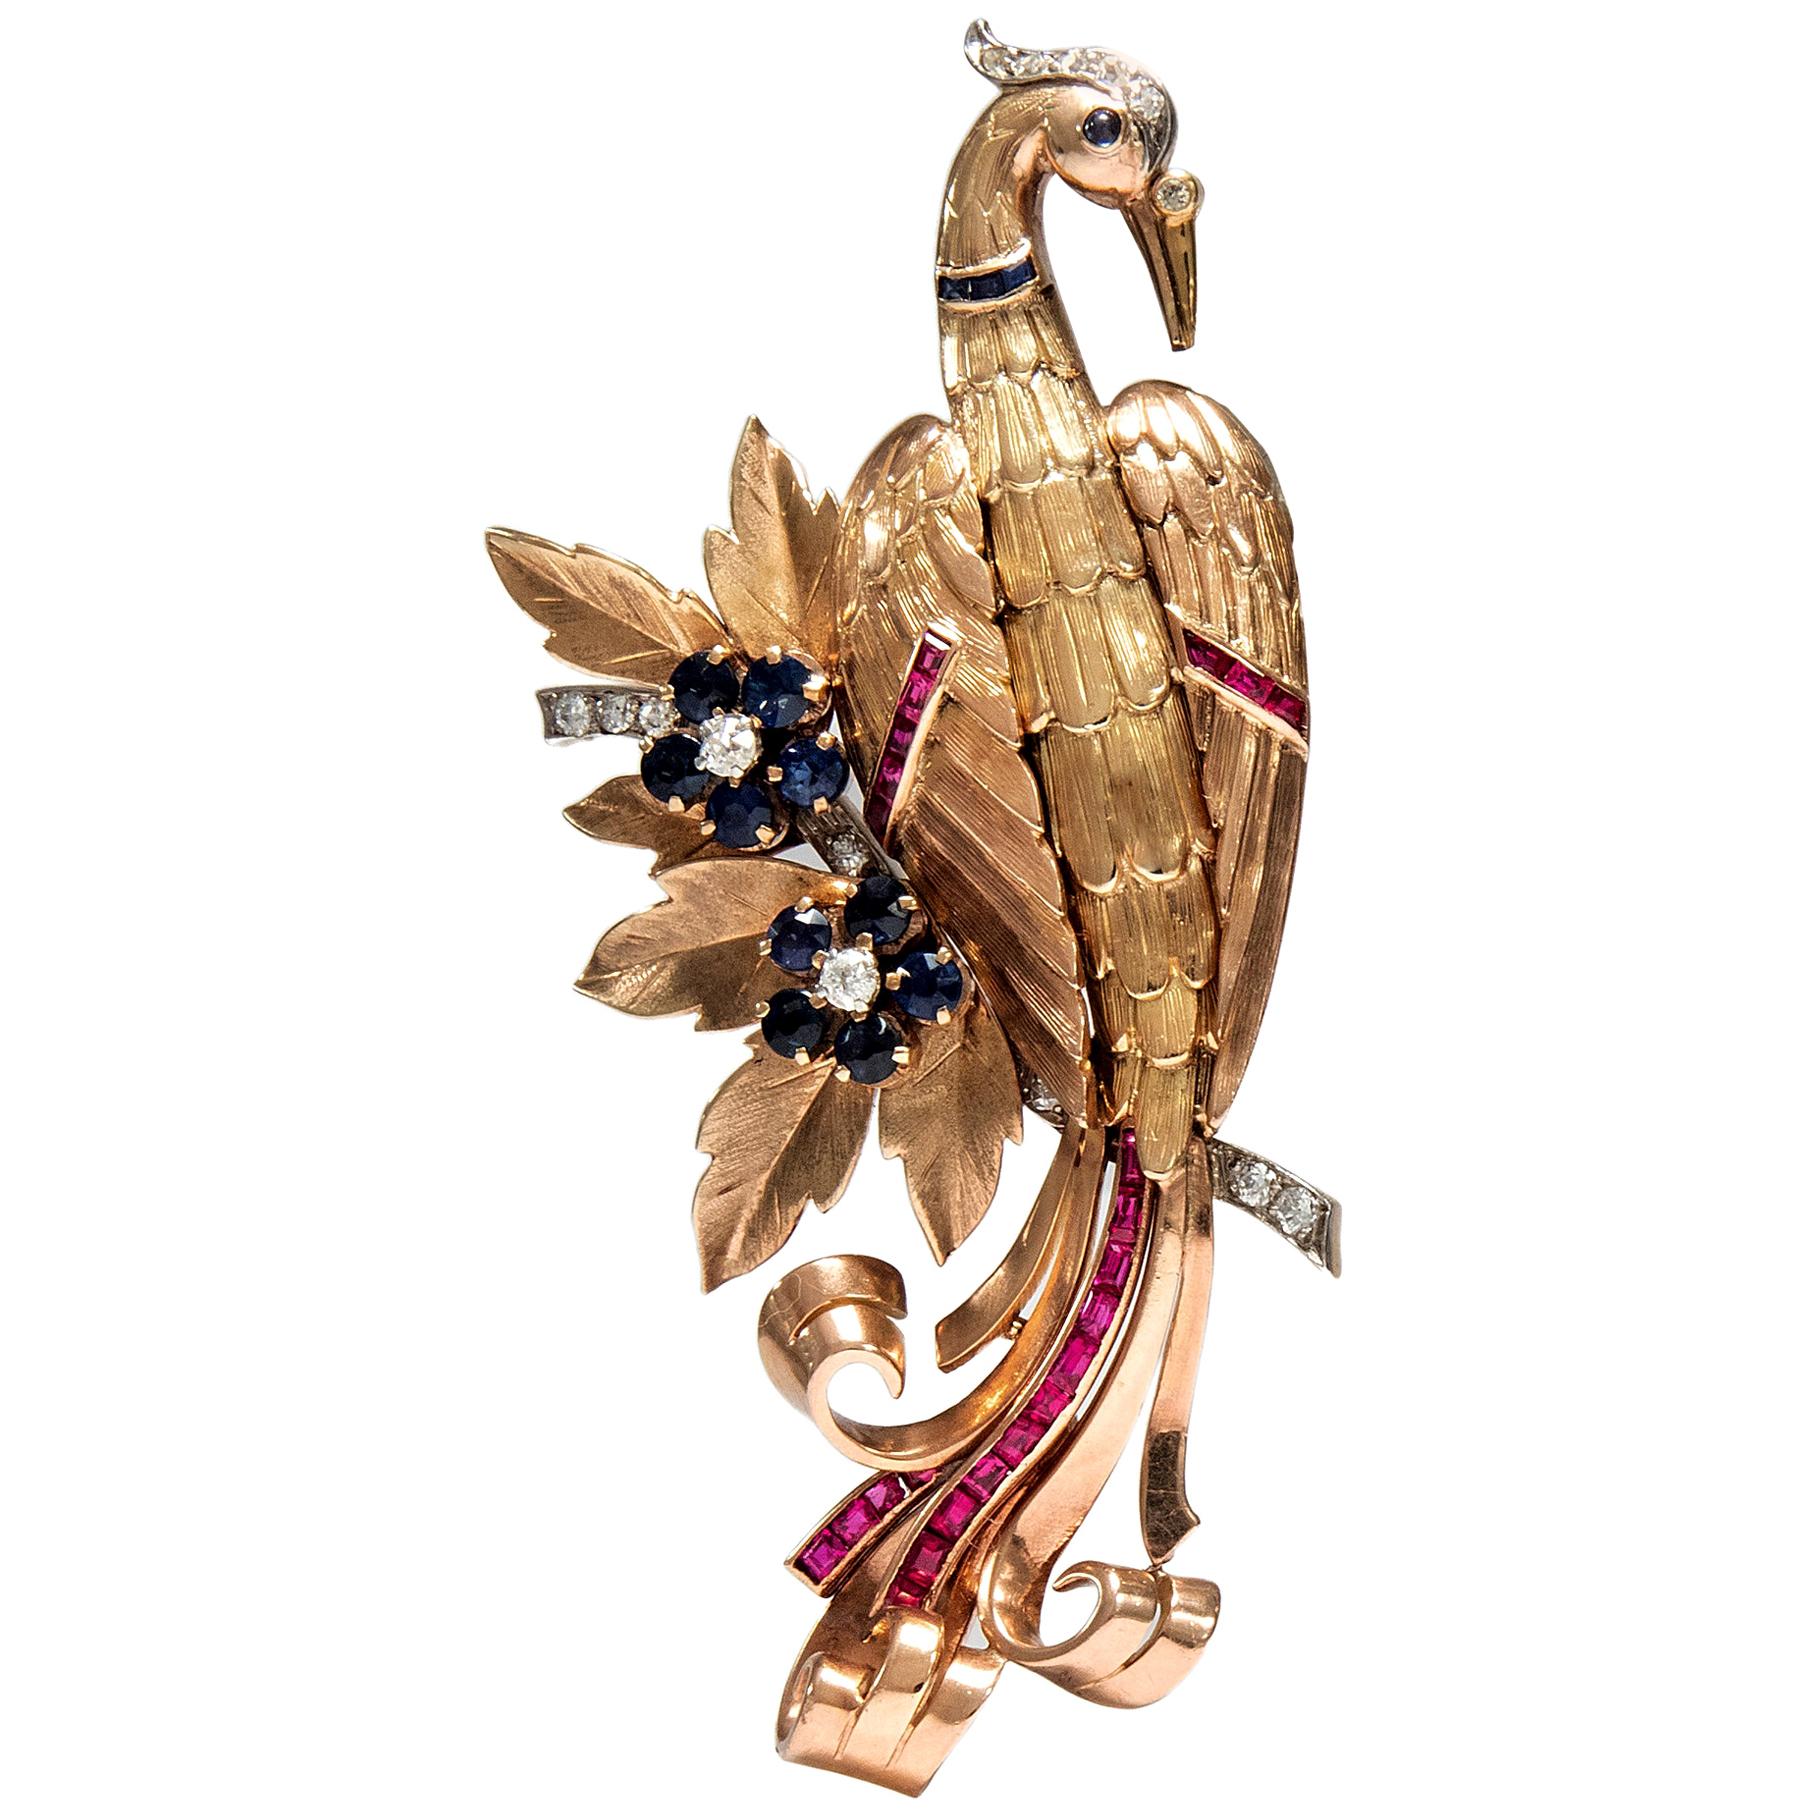 This bird of paradise brooch is not only a quintessential midcentury jewel, but likewise a first-class conversation piece. Dating to circa 1950, it perfectly embodies the taste of the post-war era: warm gold tones such as red and yellow, combined